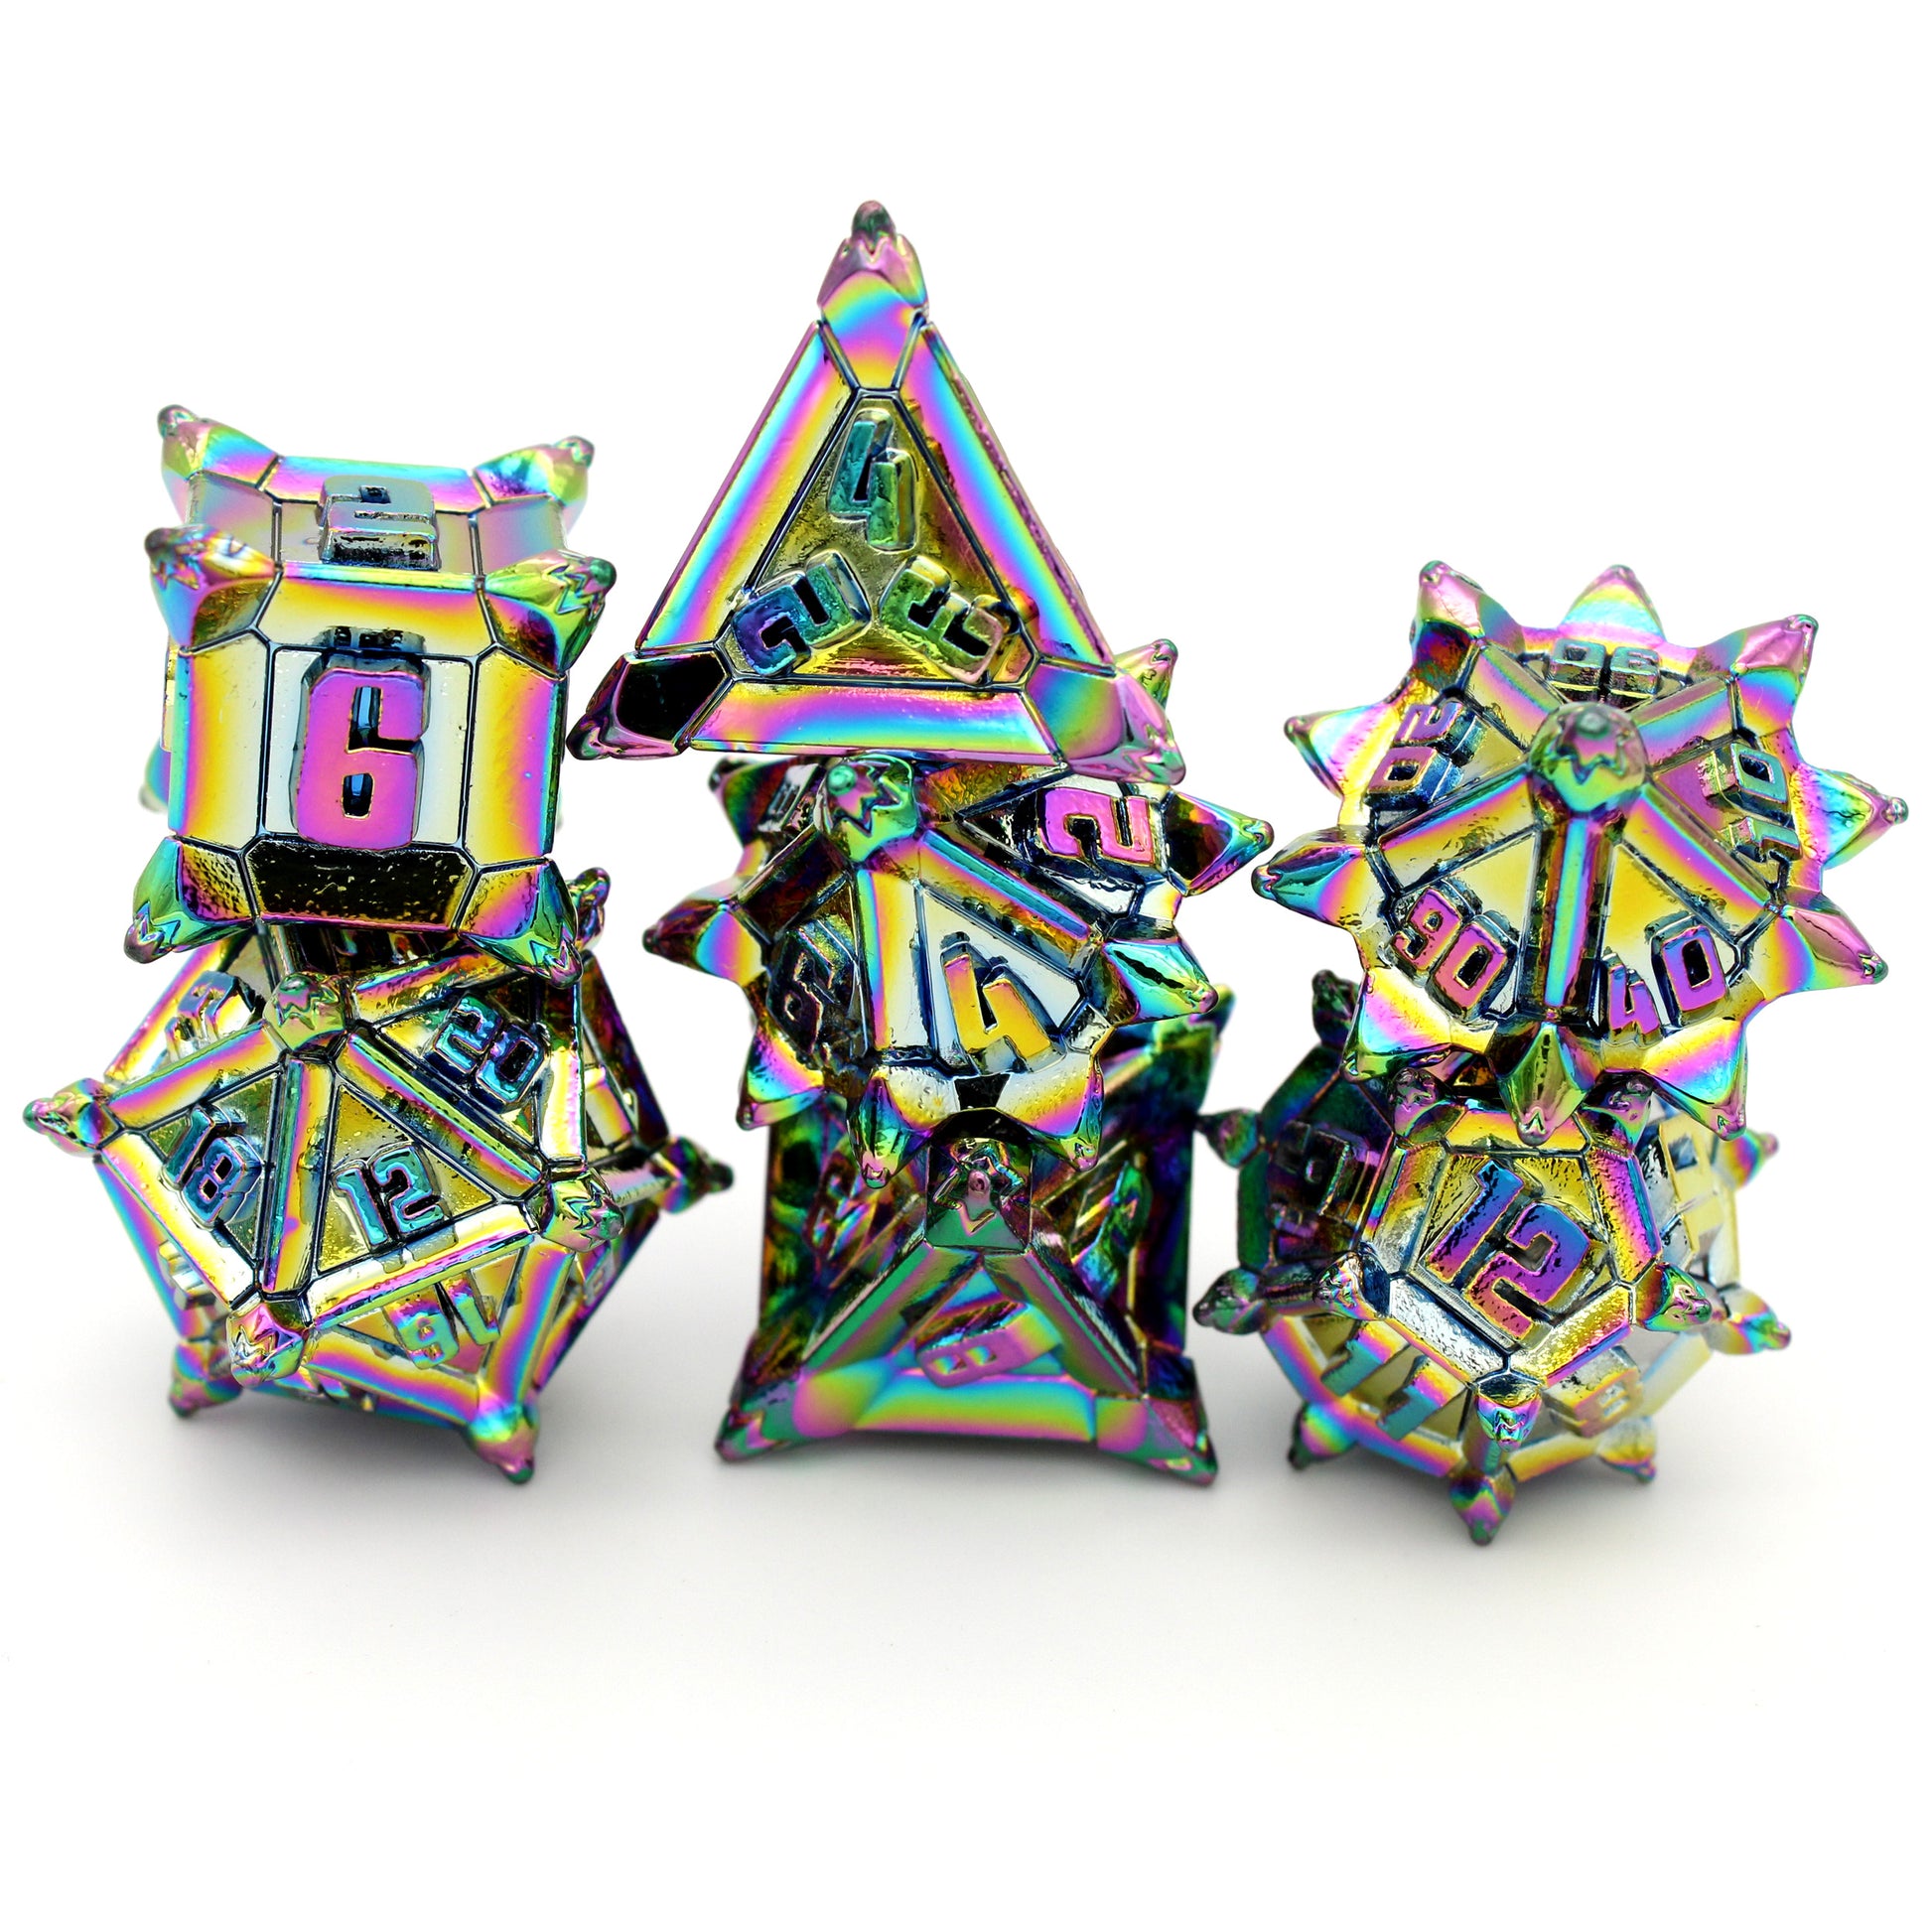 Stabby Bois is a 7-piece set of zinc alloy dice electroplated in rainbow neochrome.